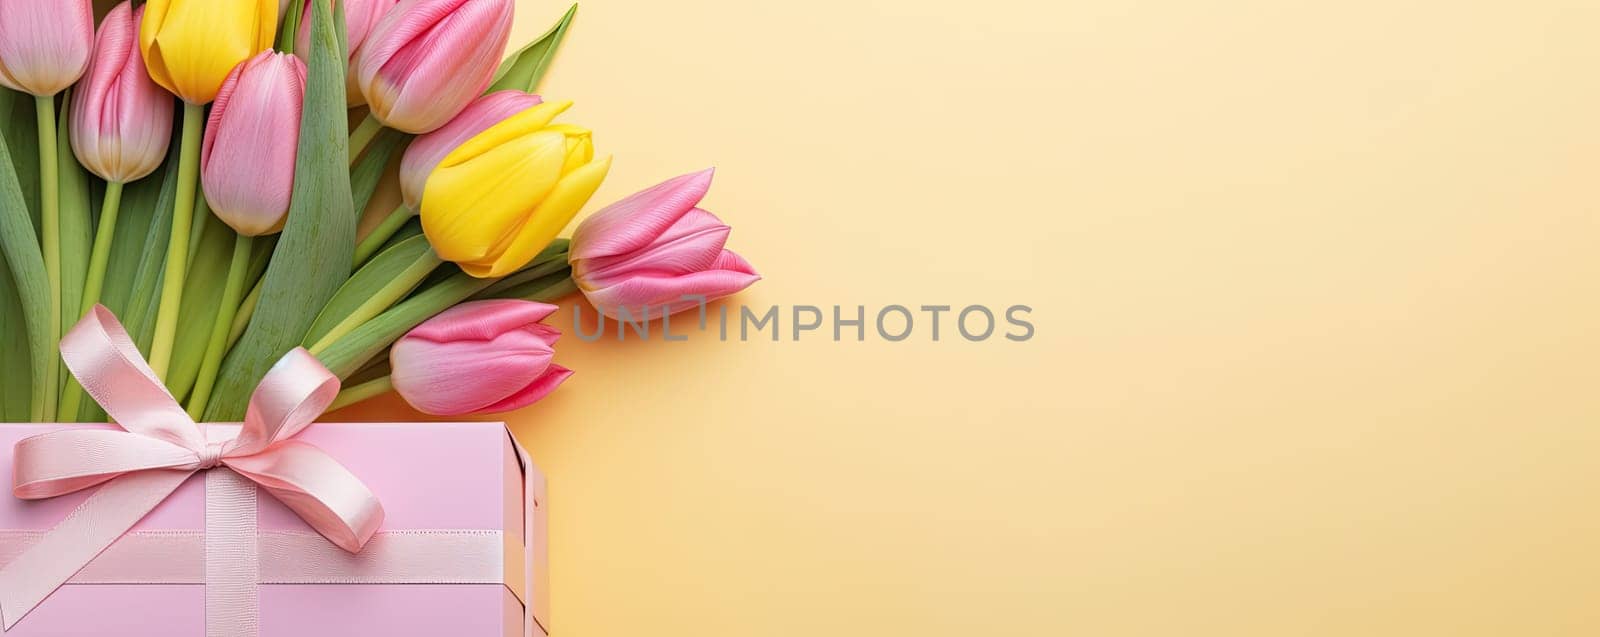 A captivating image with a striking banner decorated with fresh spring tulip flowers on a bright yellow background, perfect for seasonal designs and cheerful spring concepts.